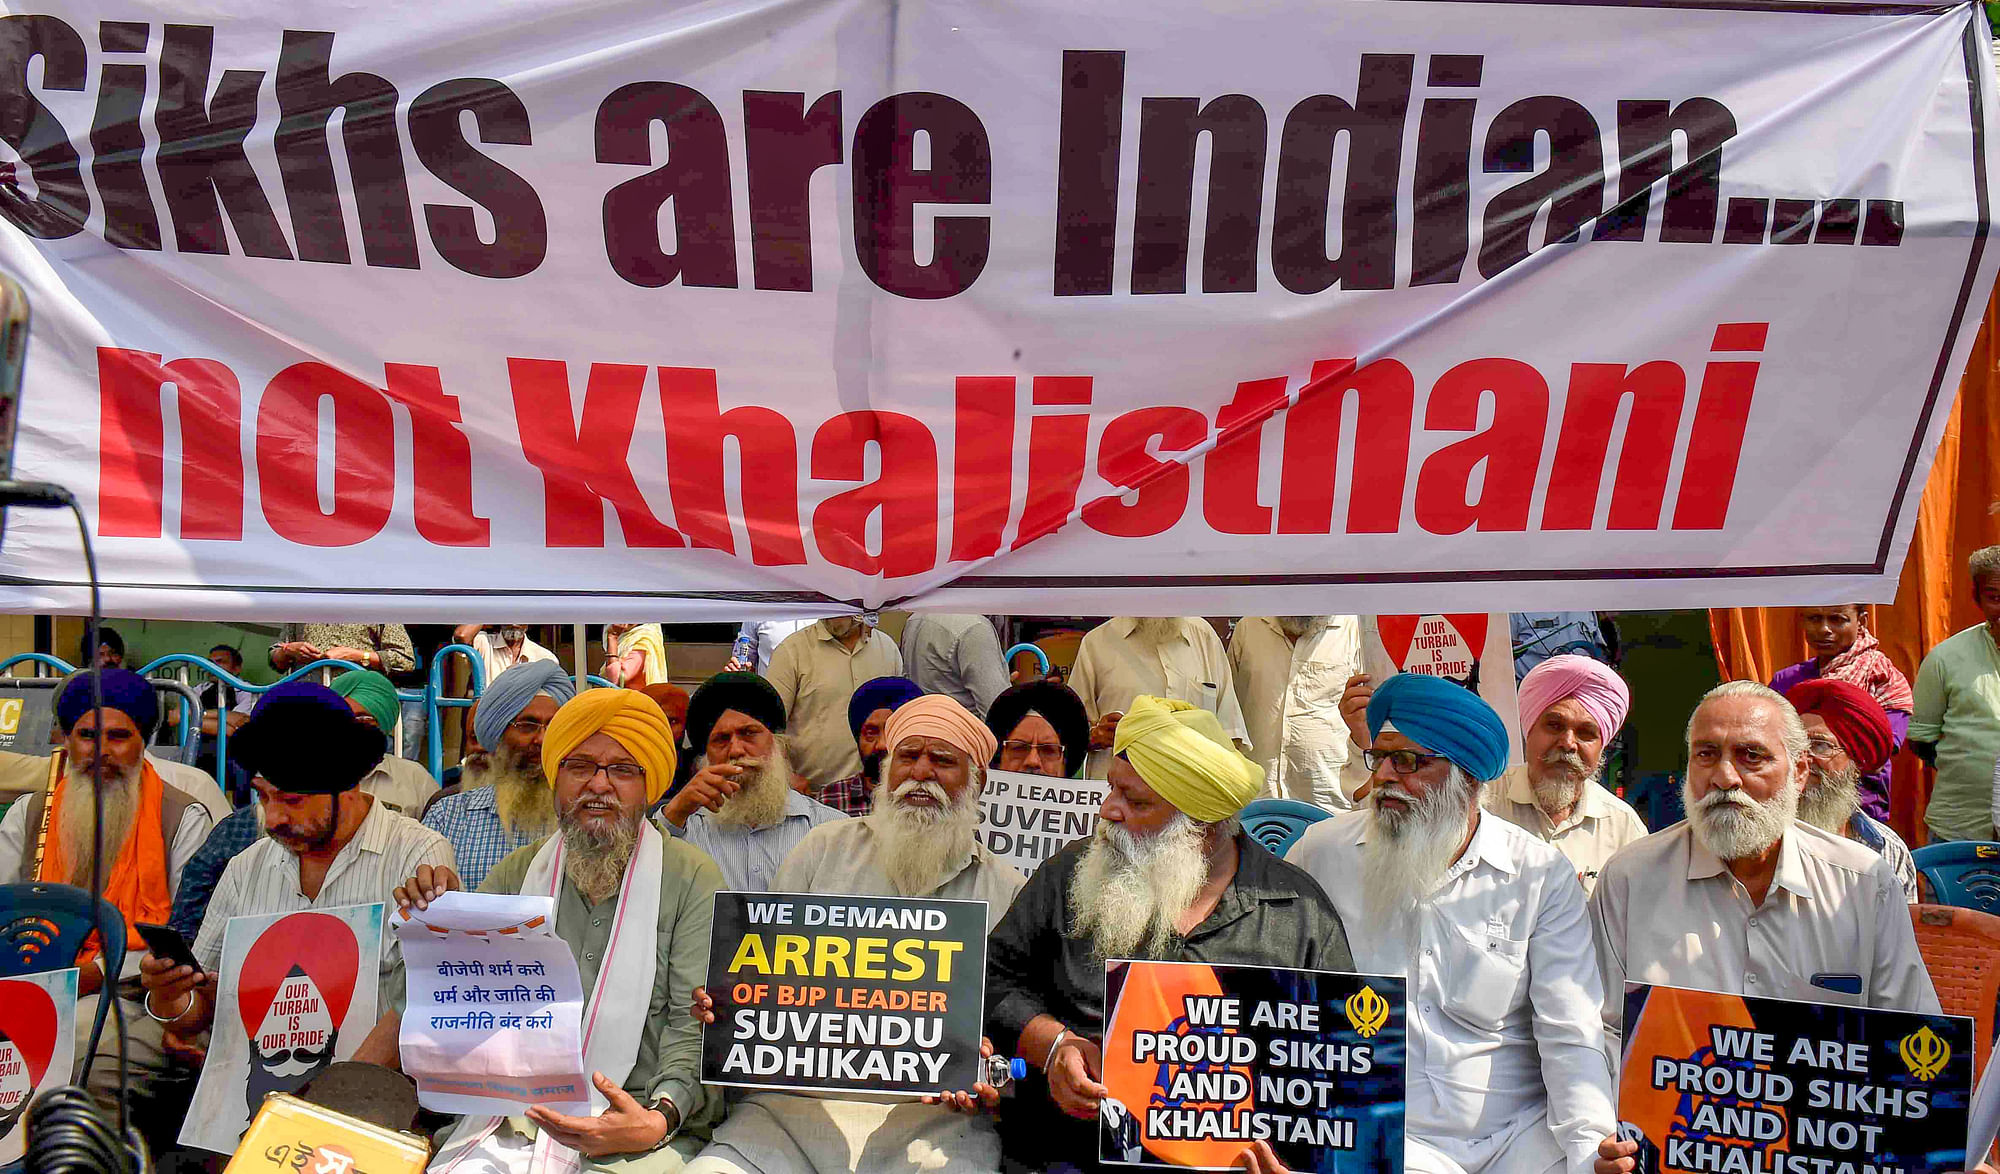 <div class="paragraphs"><p>People from the Sikh community stage a protest against BJP leader Suvendu Adhikari after he allegedly called a Sikh IPS officer Khalistani, outside the BJP office, in Kolkata on Wednesday, 21 February. Image used for representational purposes only.</p></div>